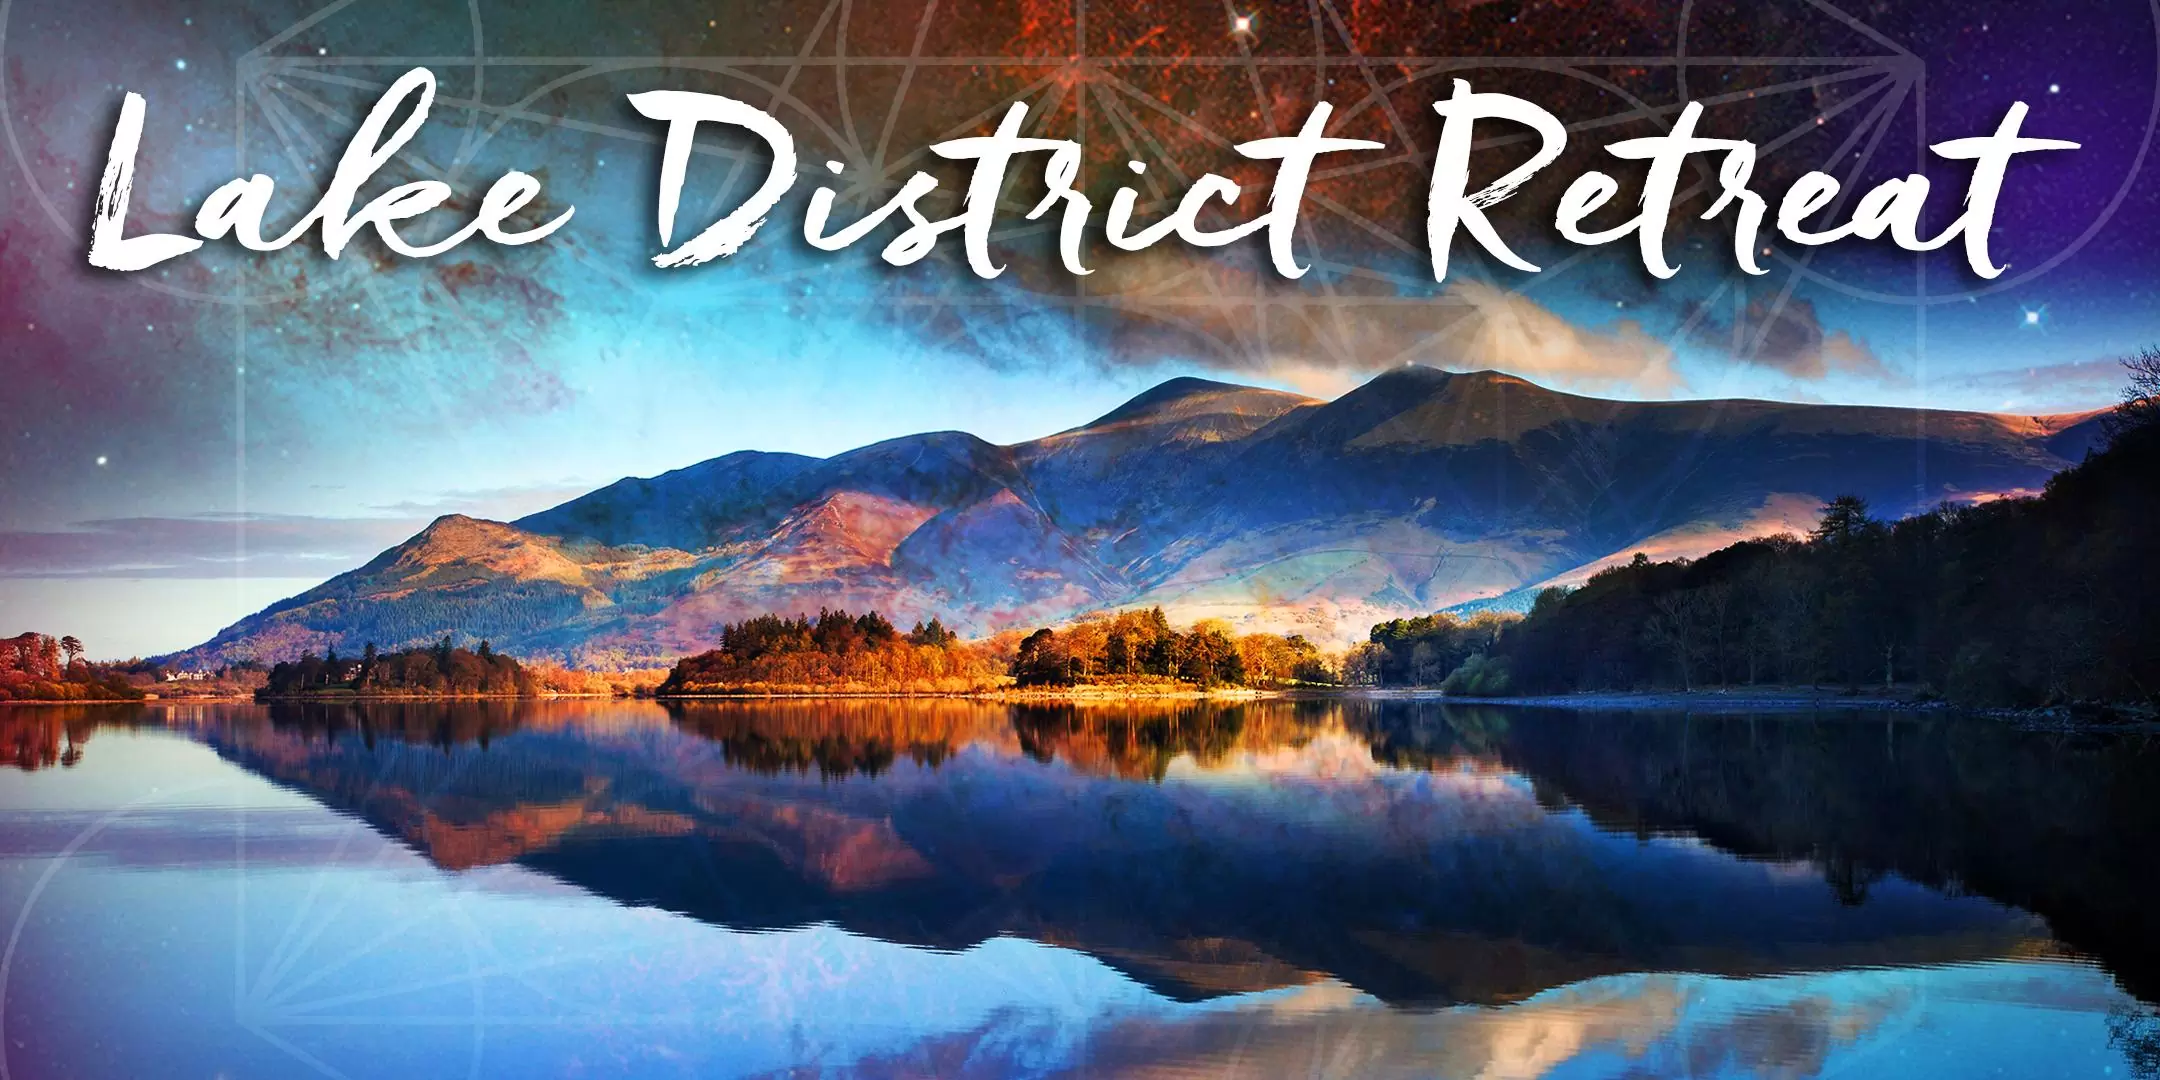 Lake District Retreat: Living in 5D